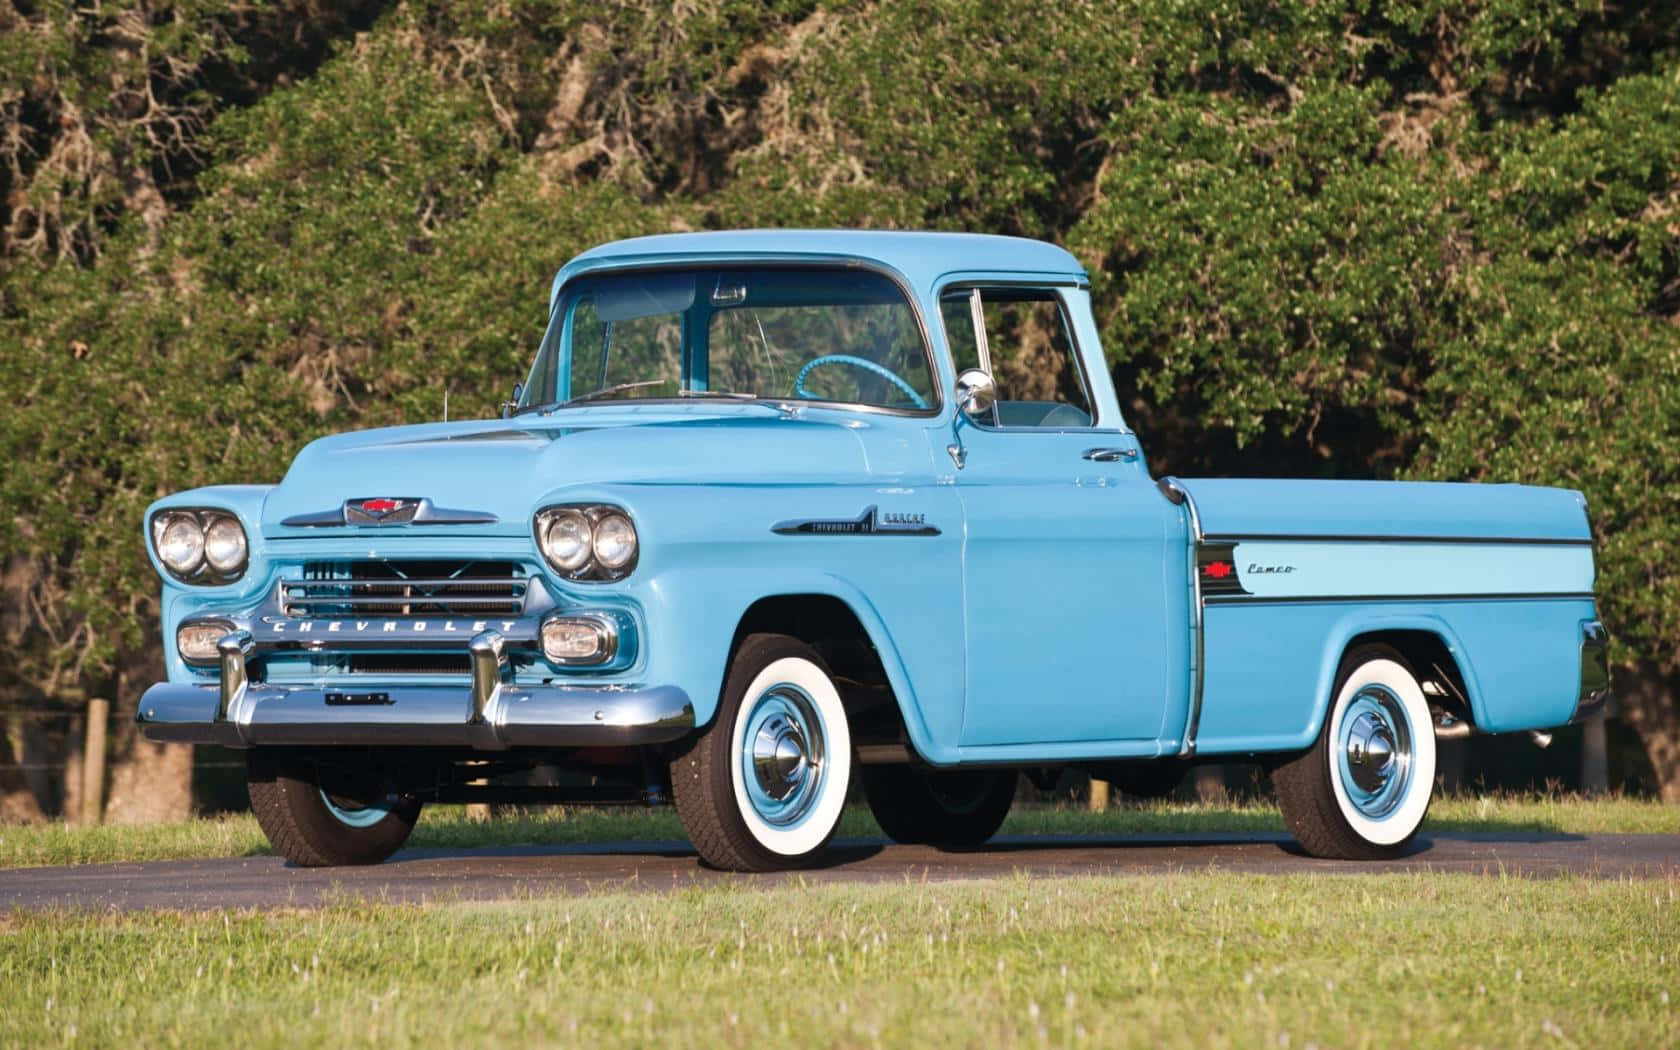 A Blue Classic Truck Is Parked On A Grassy Field